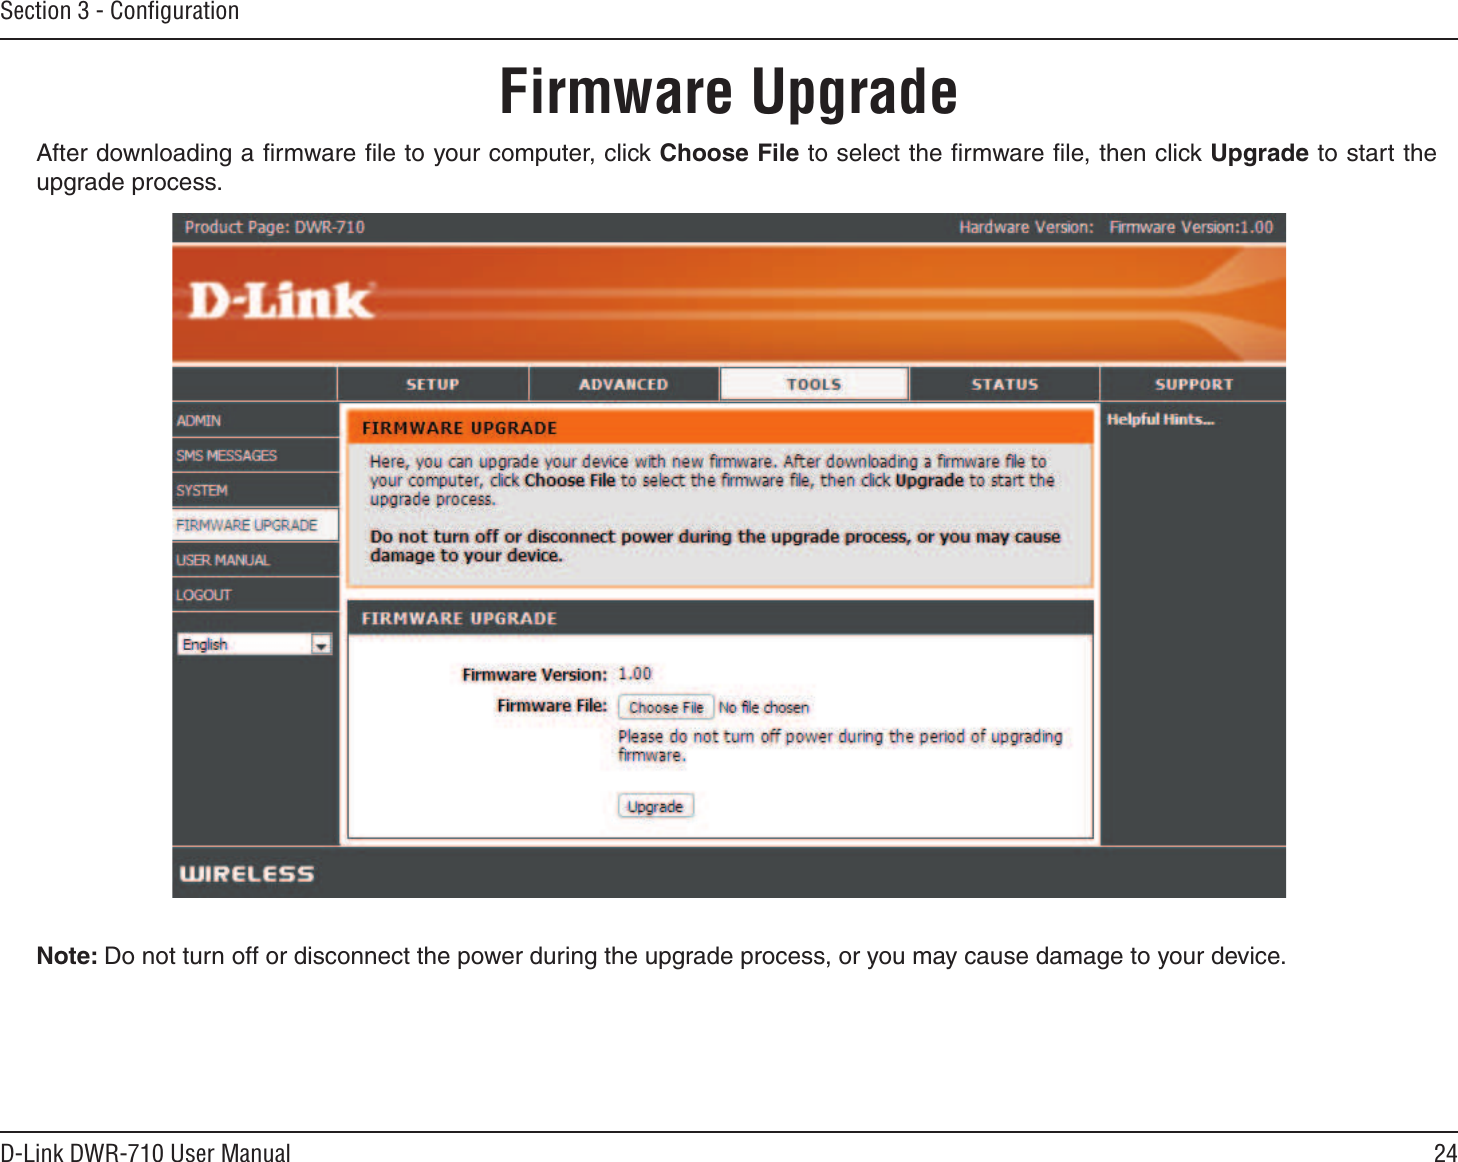 24D-Link DWR-710 User ManualSection 3 - ConﬁgurationFirmware UpgradeAfter downloading a ﬁrmware ﬁle to your computer, click Choose File to select the ﬁrmware ﬁle, then click Upgrade to start the upgrade process. Note: Do not turn off or disconnect the power during the upgrade process, or you may cause damage to your device.